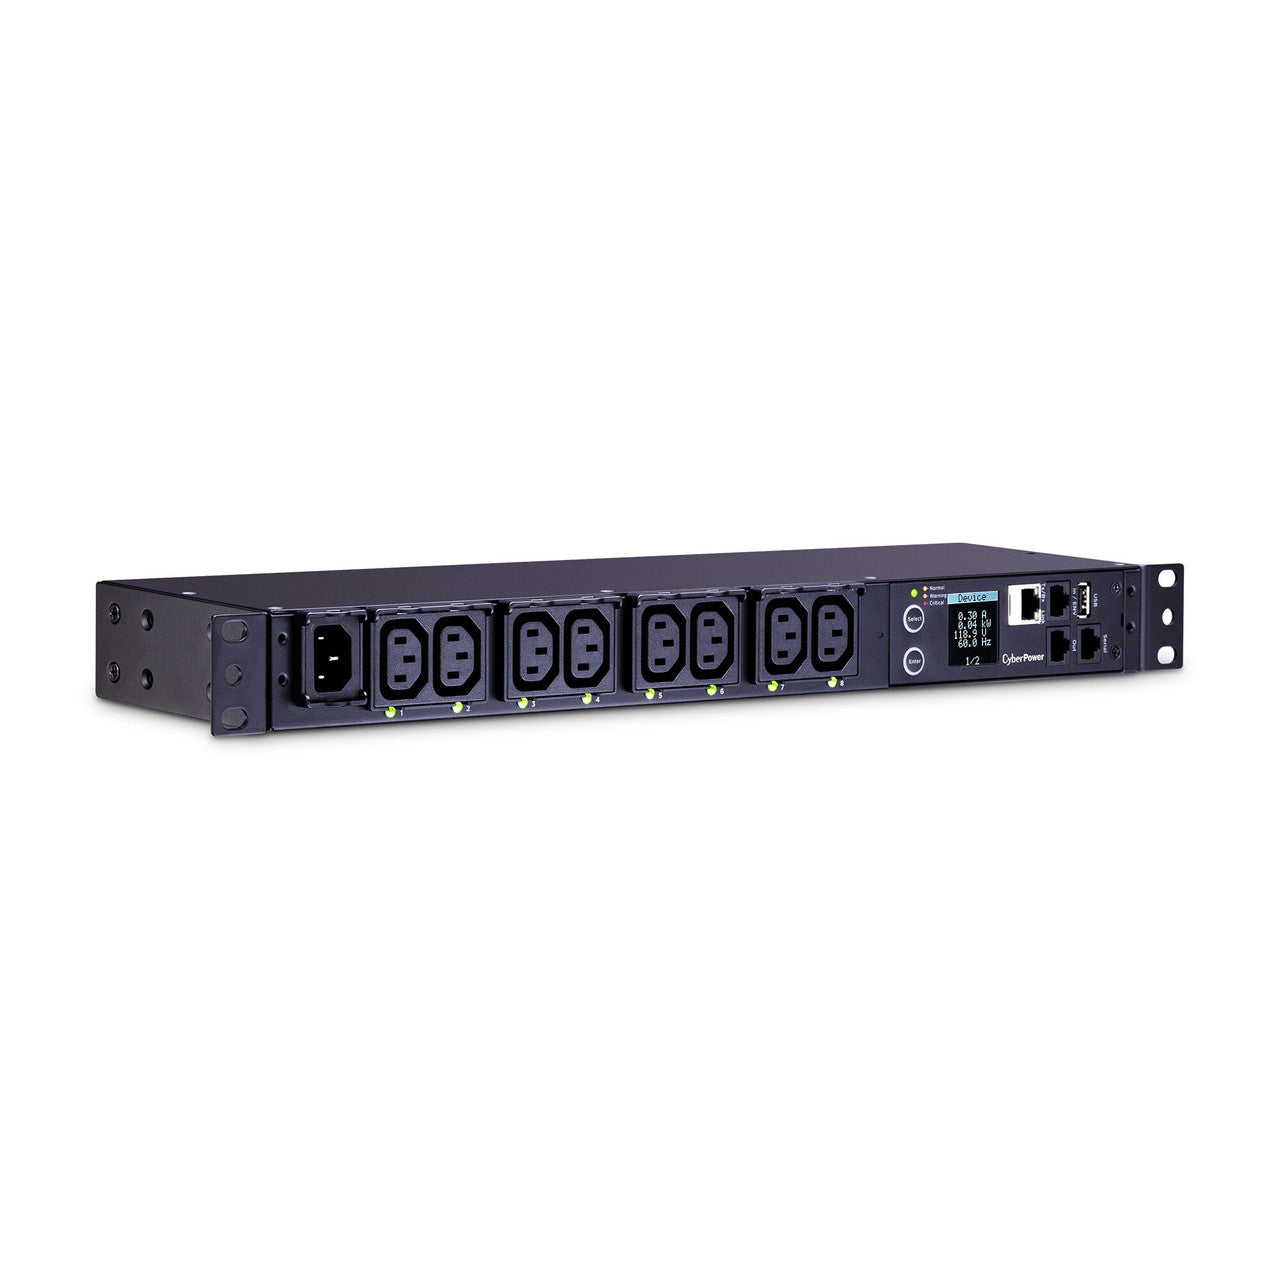 CyberPower PDU81004 SW MBO PDU 15A 100-240V Metered-by-Outlet Switched PDU 8 C13 Outlets 10ft cord 3yr Warranty